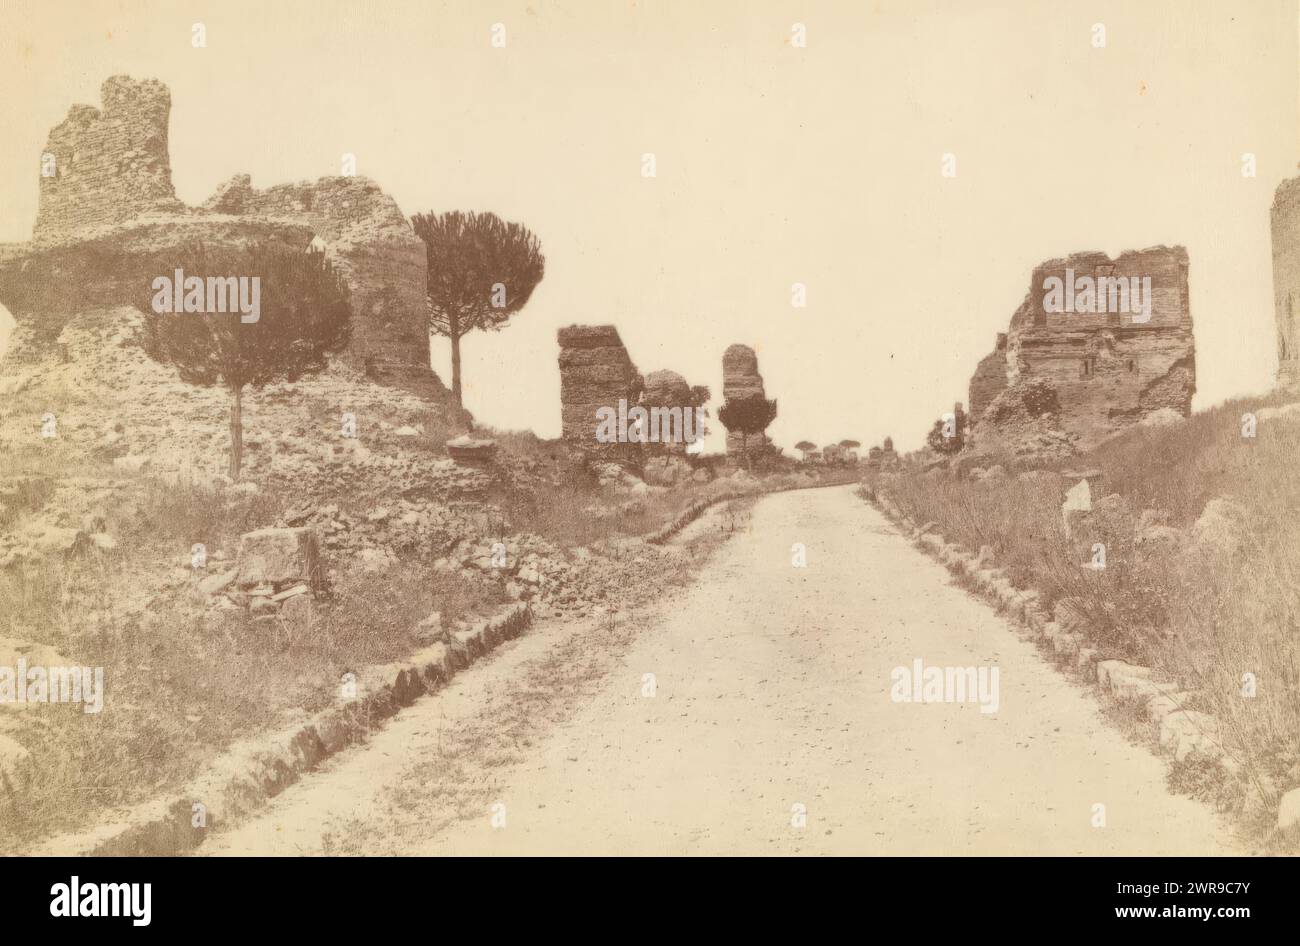 View of the Via Appia near Rome, anonymous, Rome, c. 1850 - in or before 1860, photographic support, albumen print, height 63 mm × width 90 mm, photograph Stock Photo